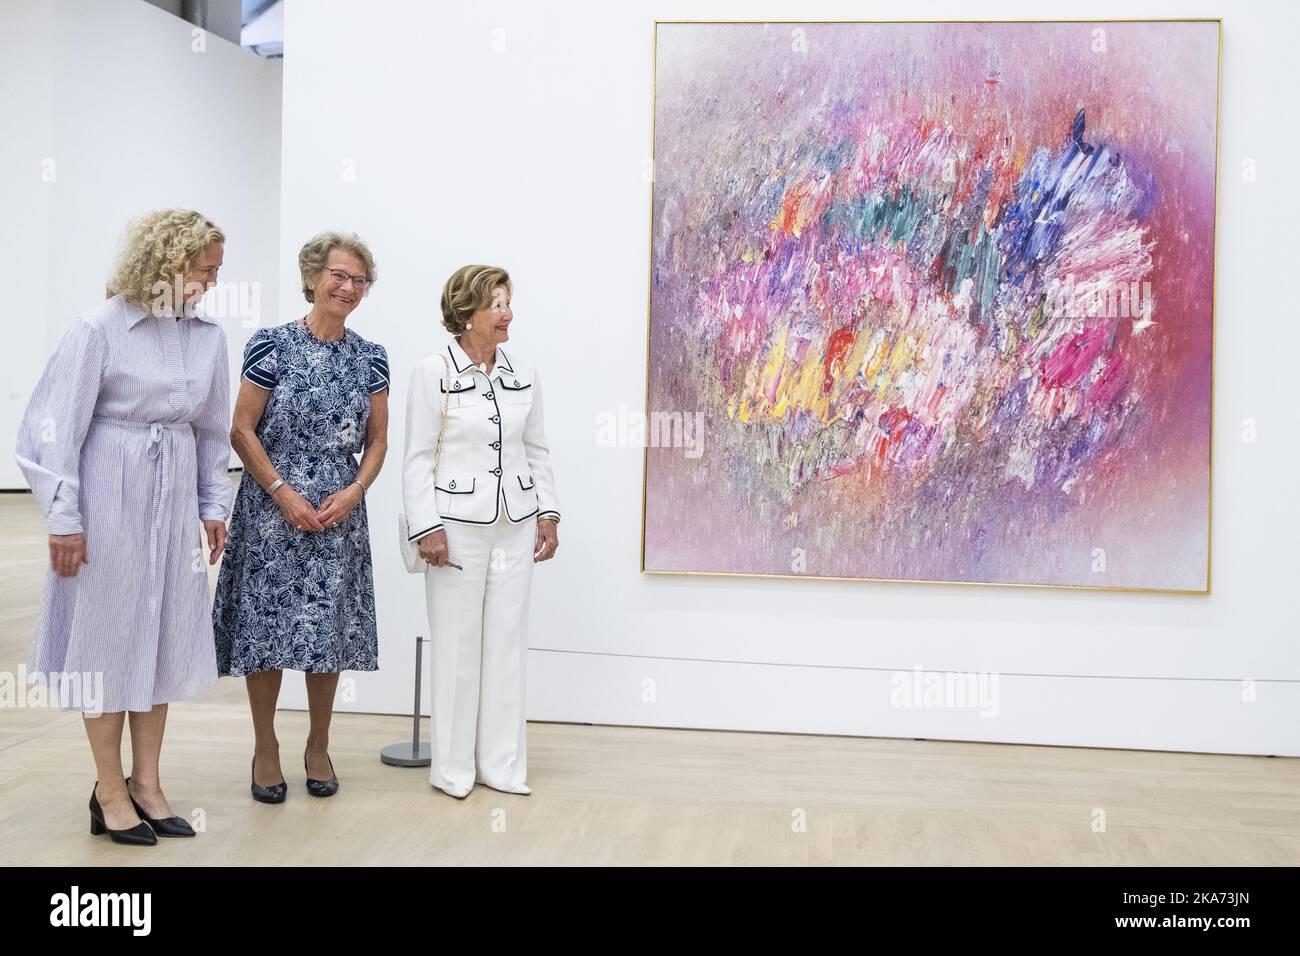 HOVIK, NORWAY 20180615. Queen Sonja is present during the opening of the Jakob Weidemann exhibition at Henie Onstad Art Center at Hovik. Here together with director Tone Hansen (left) and curator for the exhibition and former friend of Weidemann, Karin Hellandsjo, at the artwork 'Markblomst' from 1982. Photo: Haakon Mosvold Larsen / NTB scanpi Stock Photo